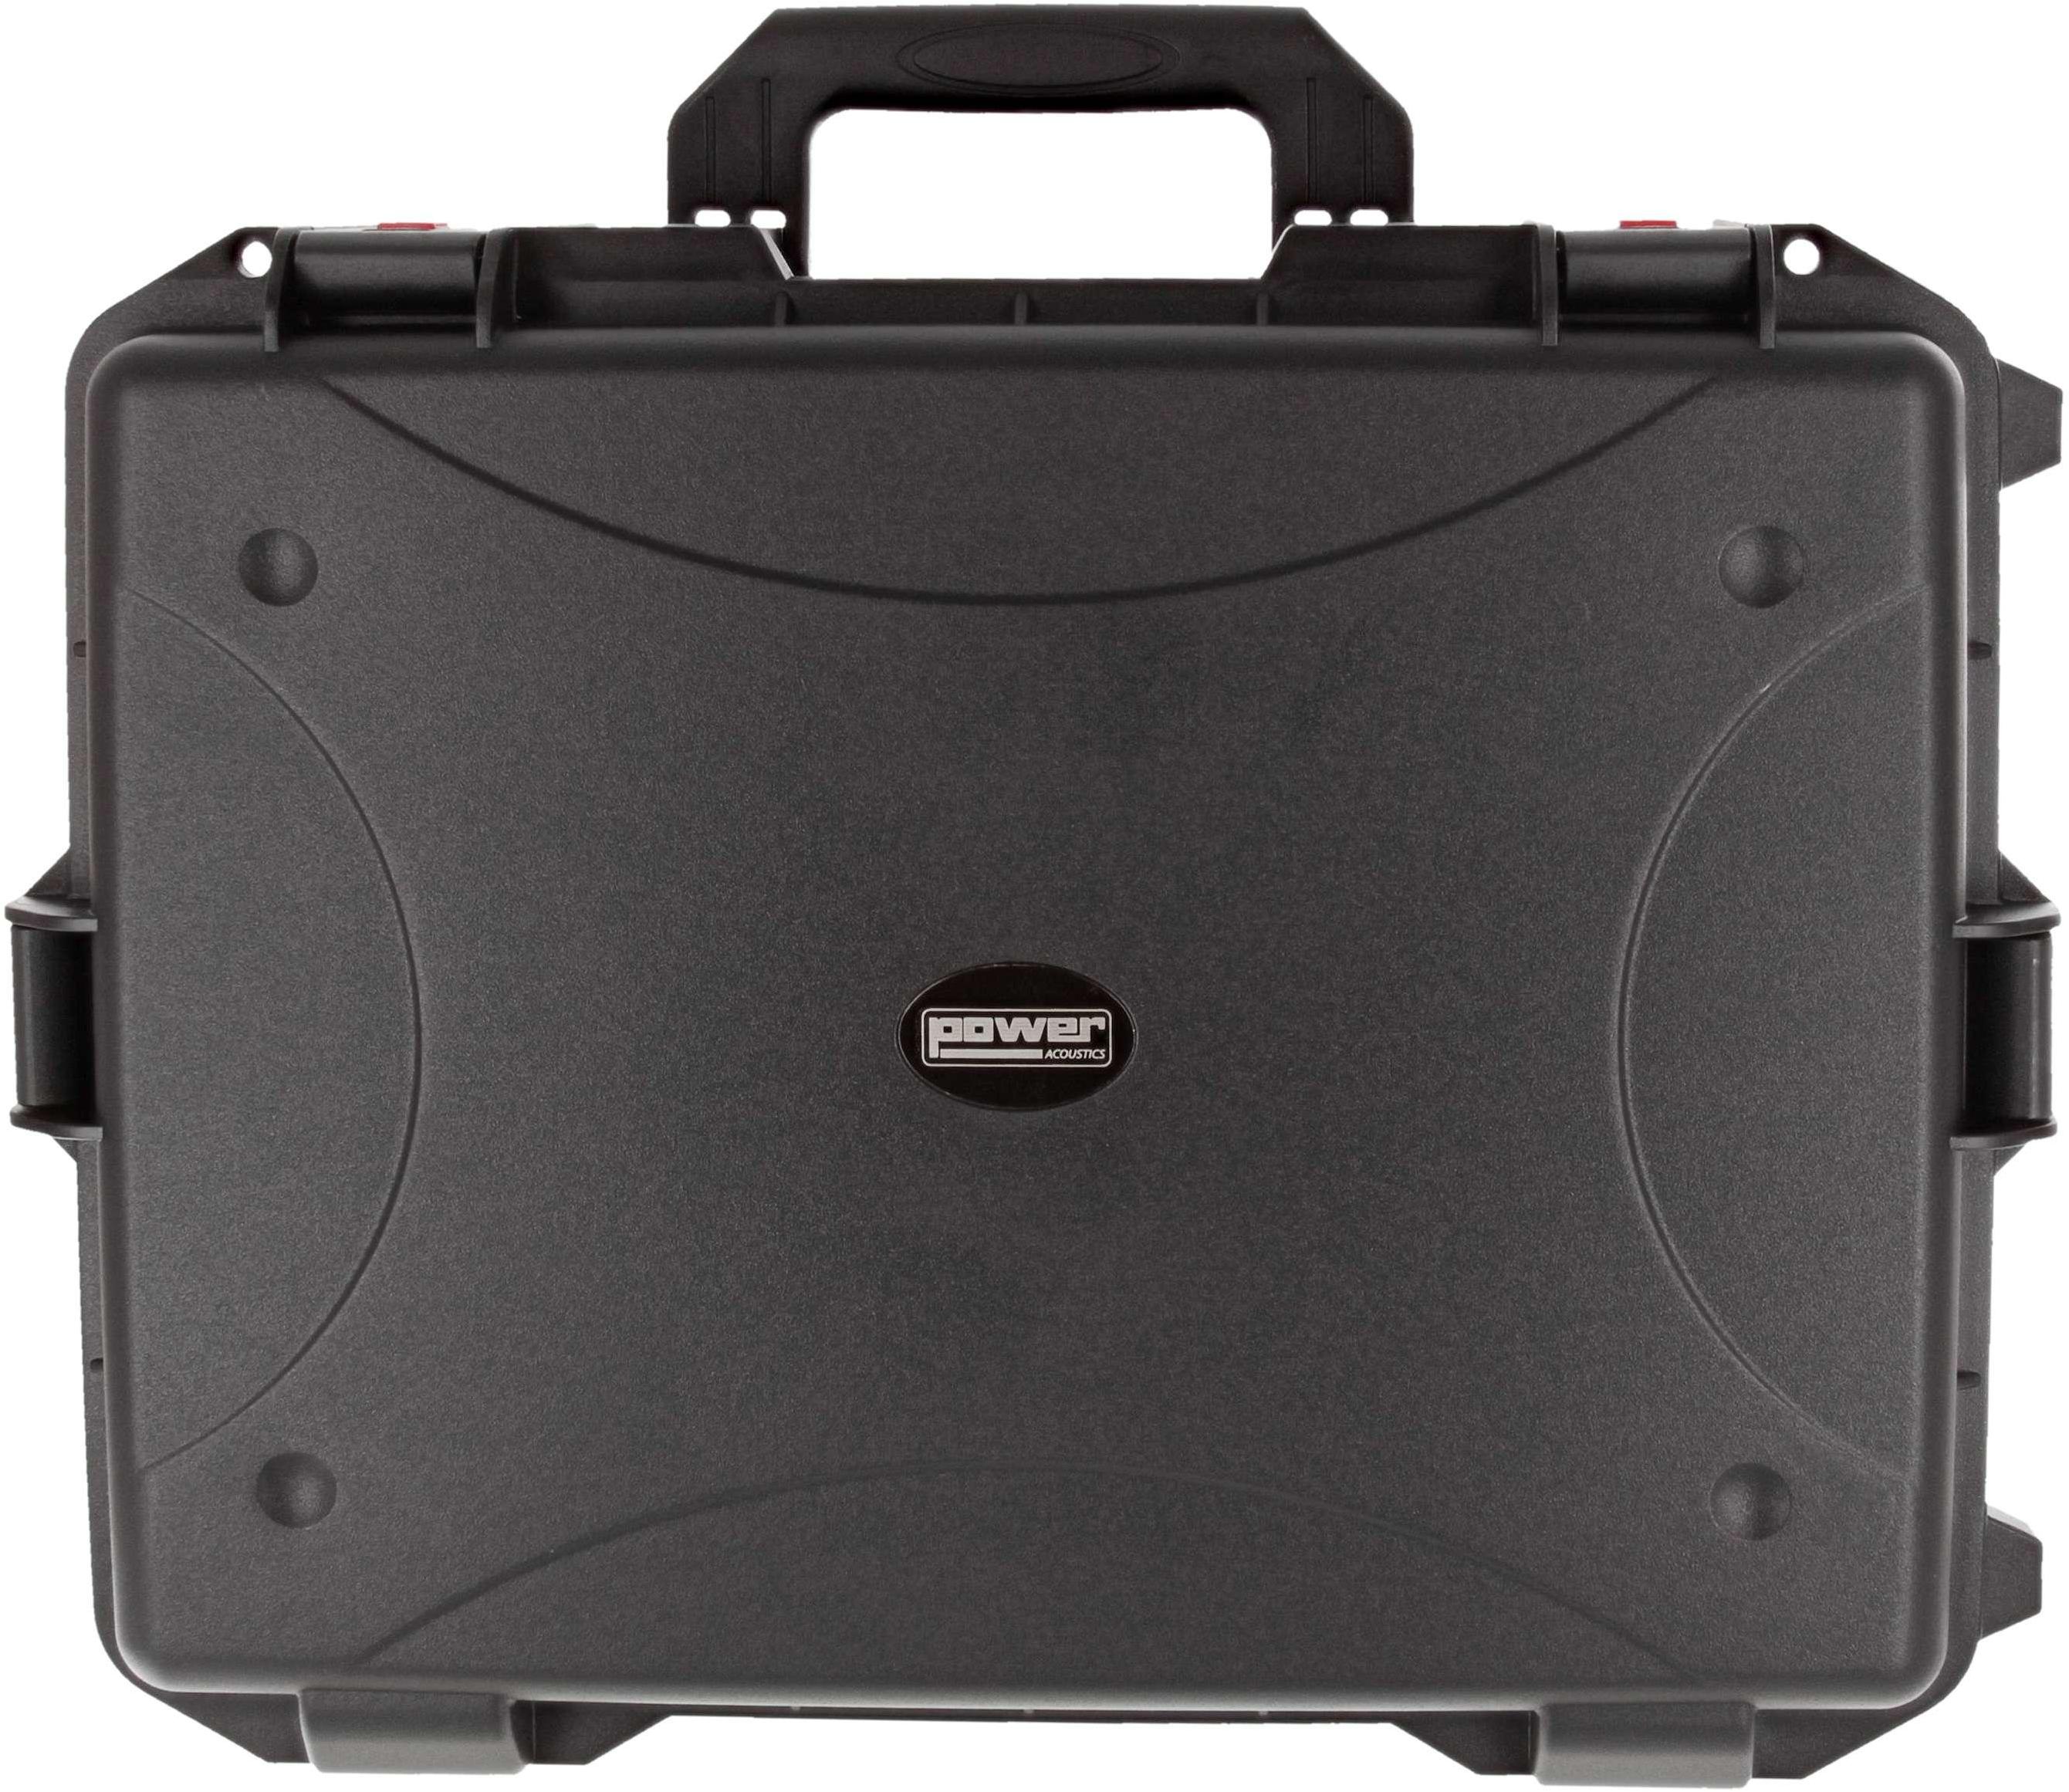 Hardware case Power acoustics IP65 CASE 60 Flight Case ABS With Trolley